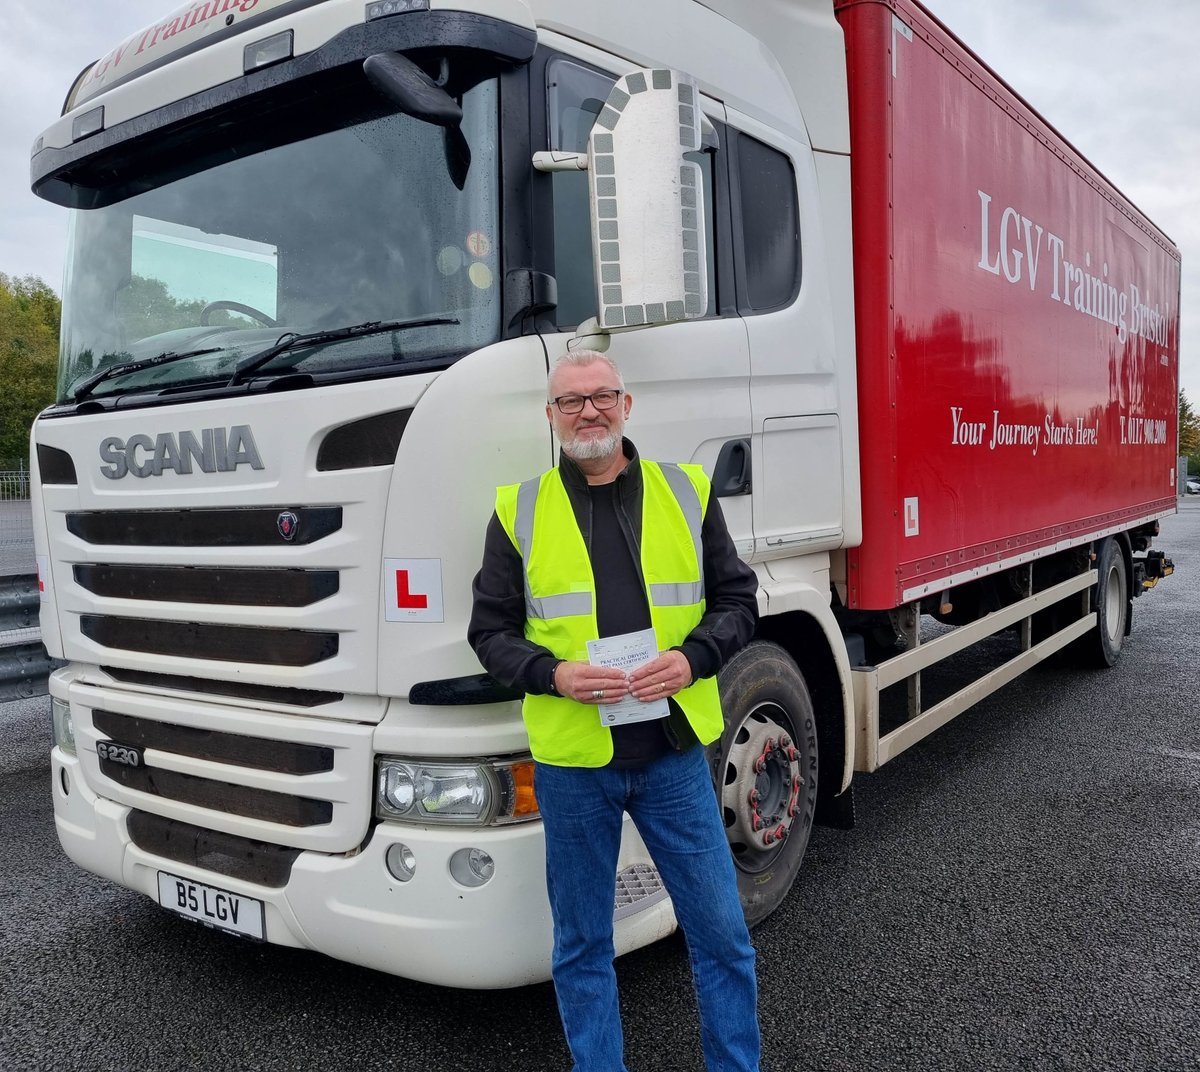 Congratulations to Matt on passing his LGV Cat.C driving test today. First time and with a clean sheet too. Well done. Keep up the safe driving. We wish you all the very best for the future! LGVTrainingBristol.com #YourJourneyStartsHere